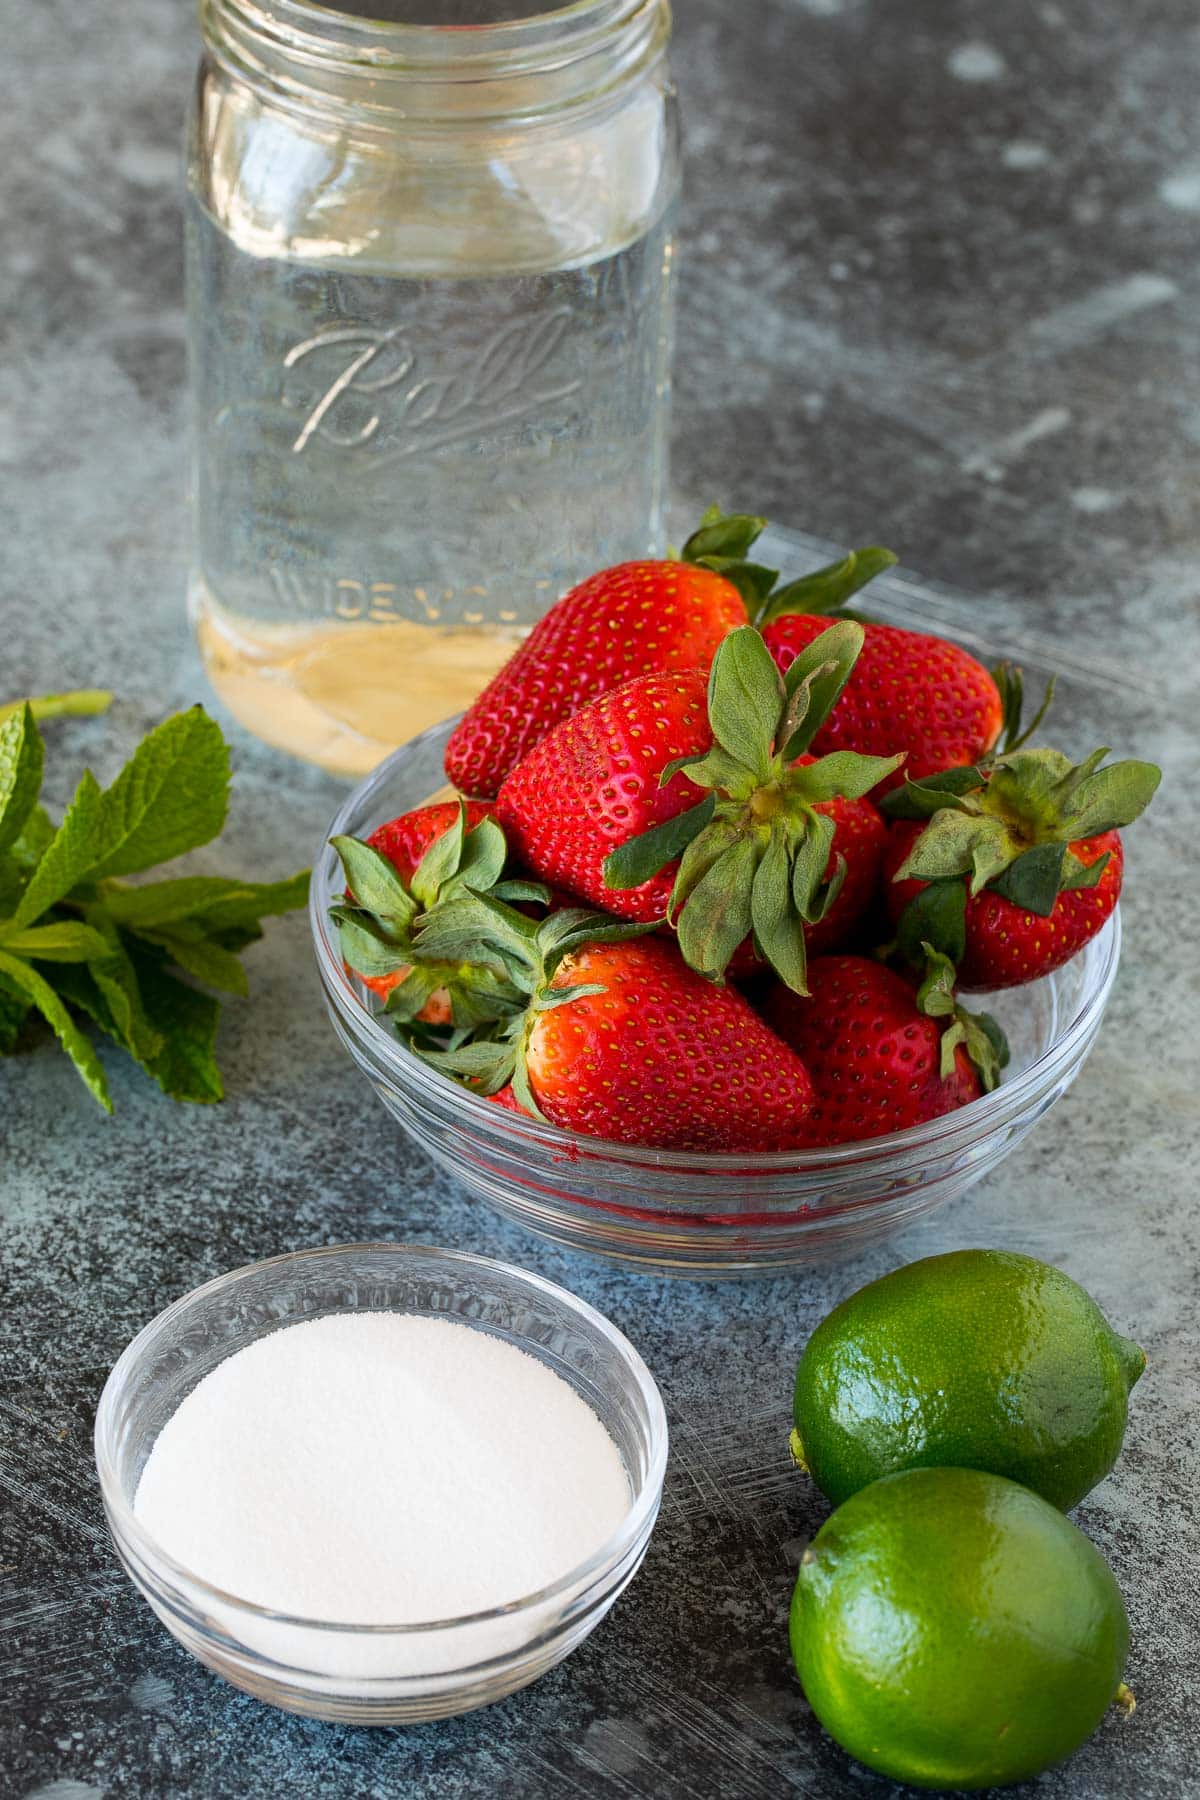 Strawberries, sugar, limes, water and mint.